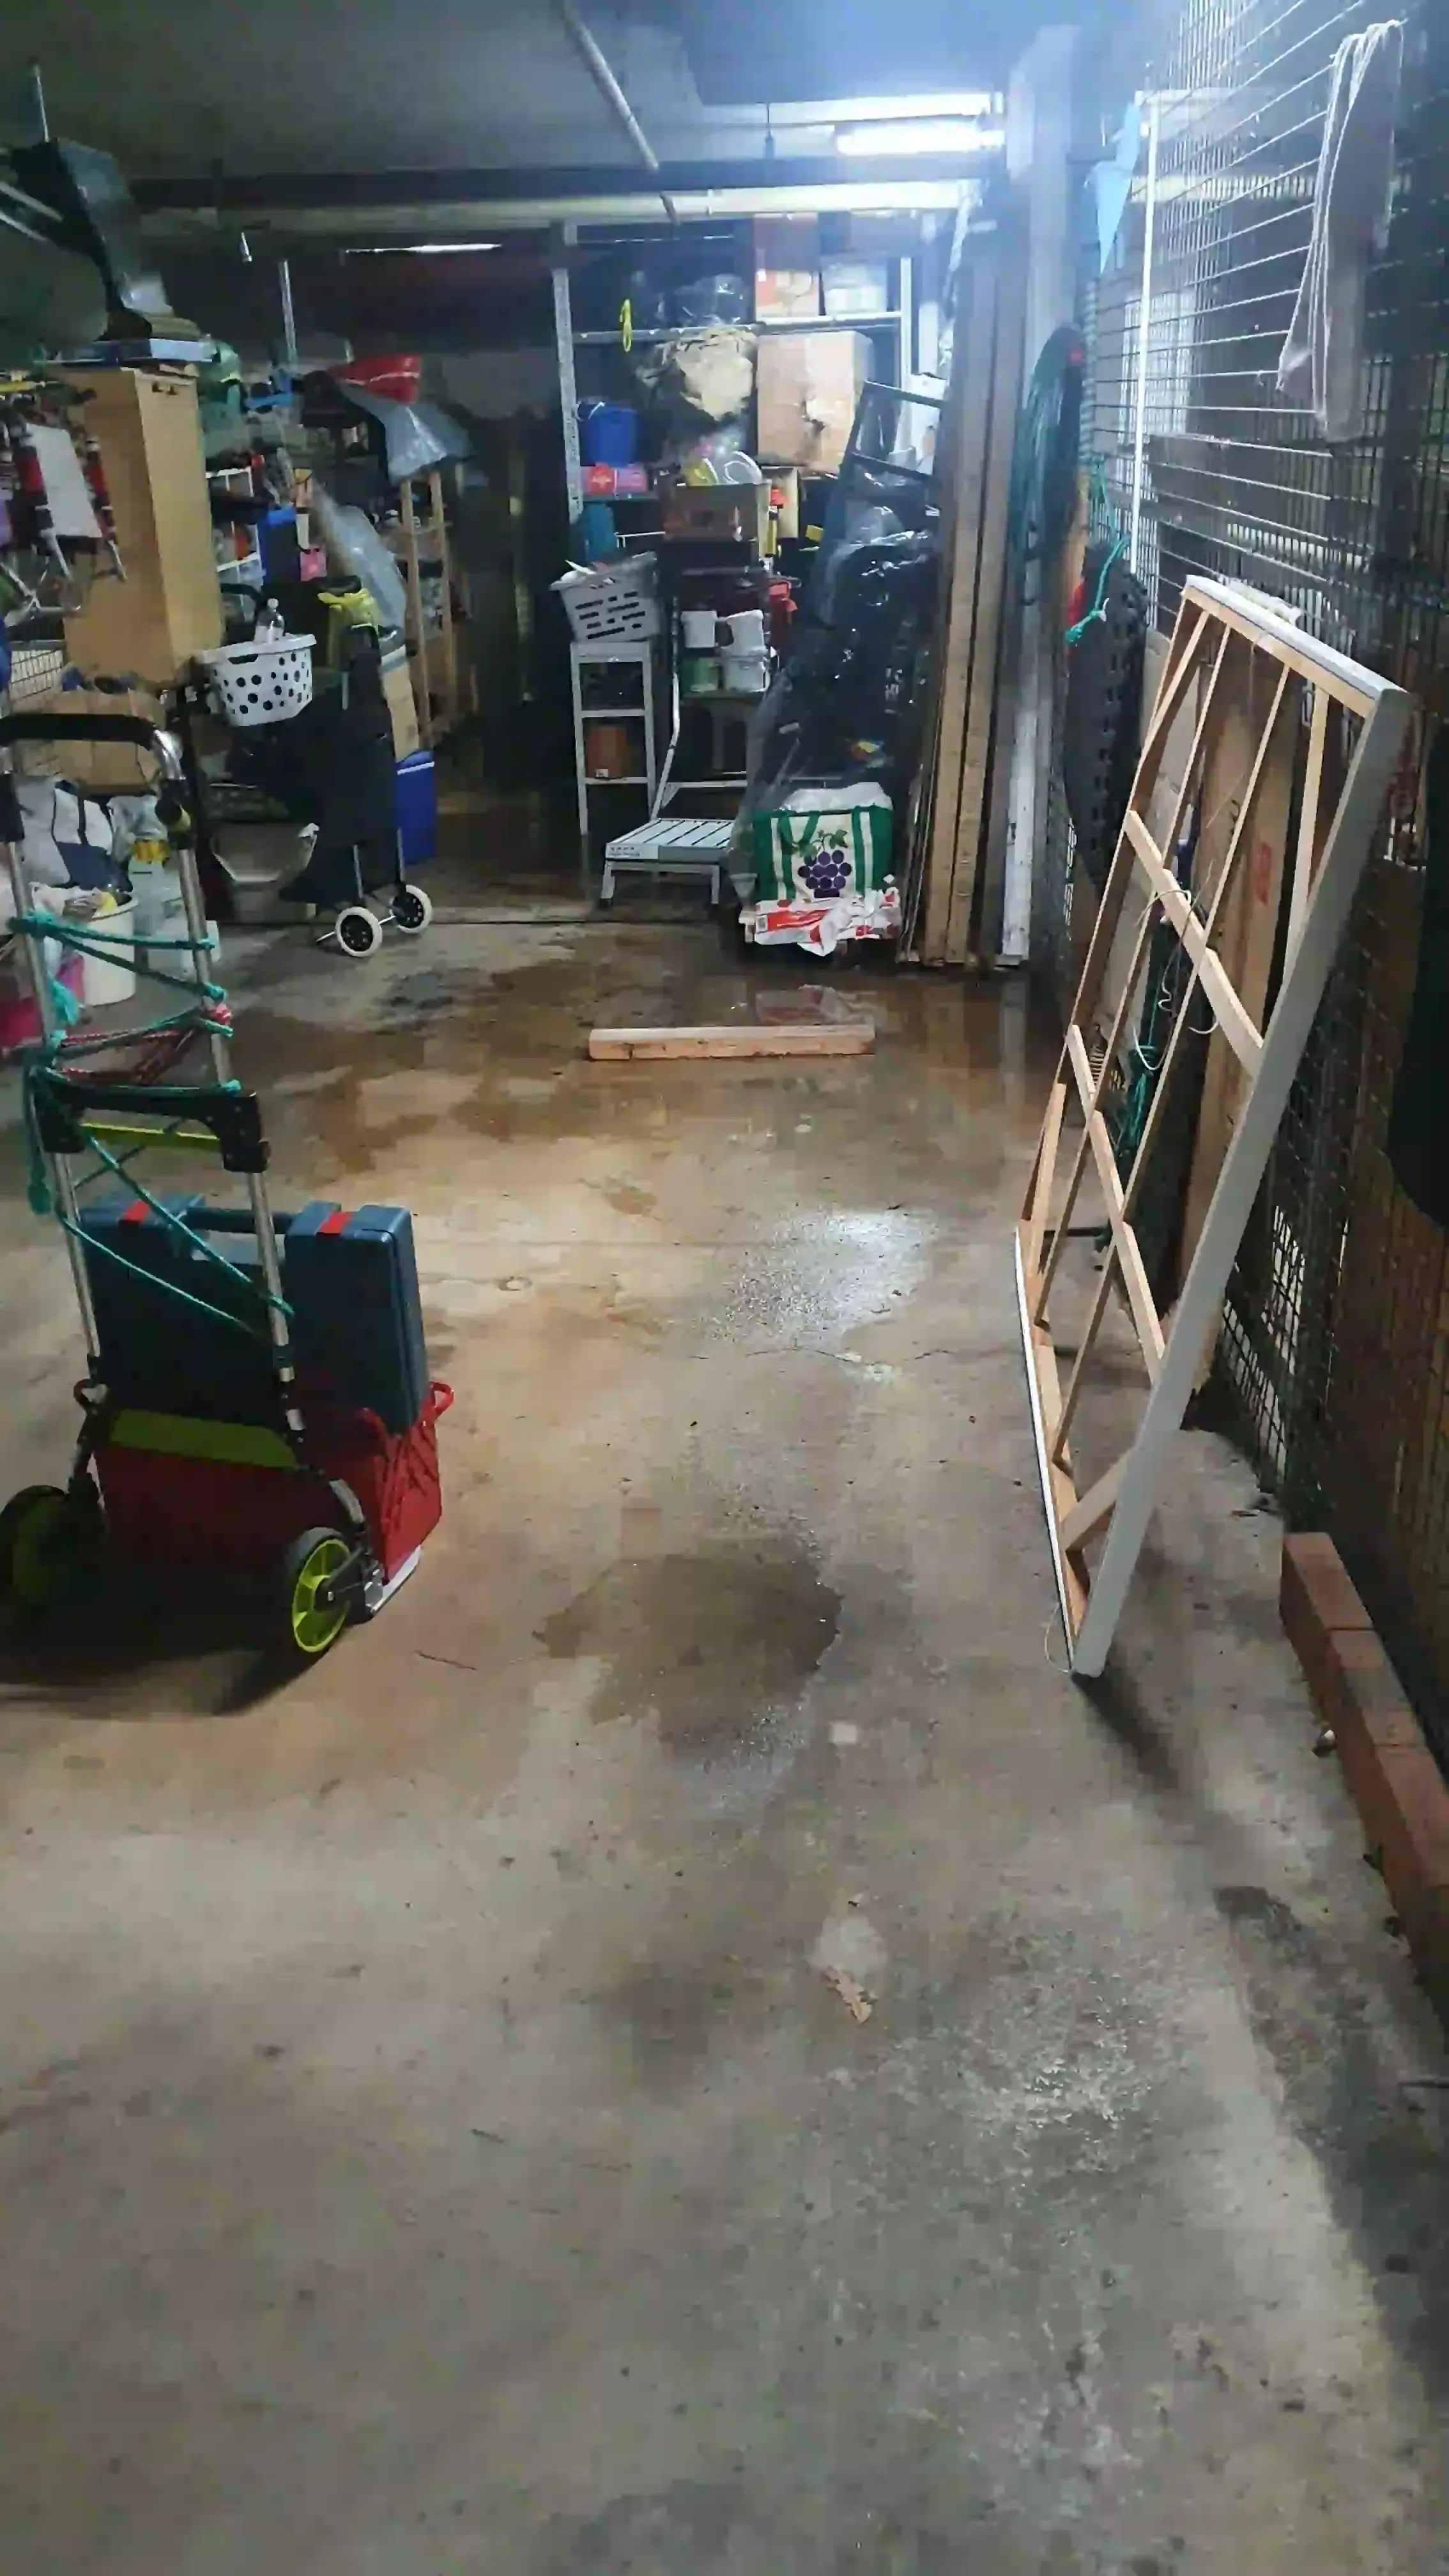 SP52948-examples-of-serious-damages-due-to-water-leakages-in-Lot-186-garage-photo-3-1Mar2022.webp